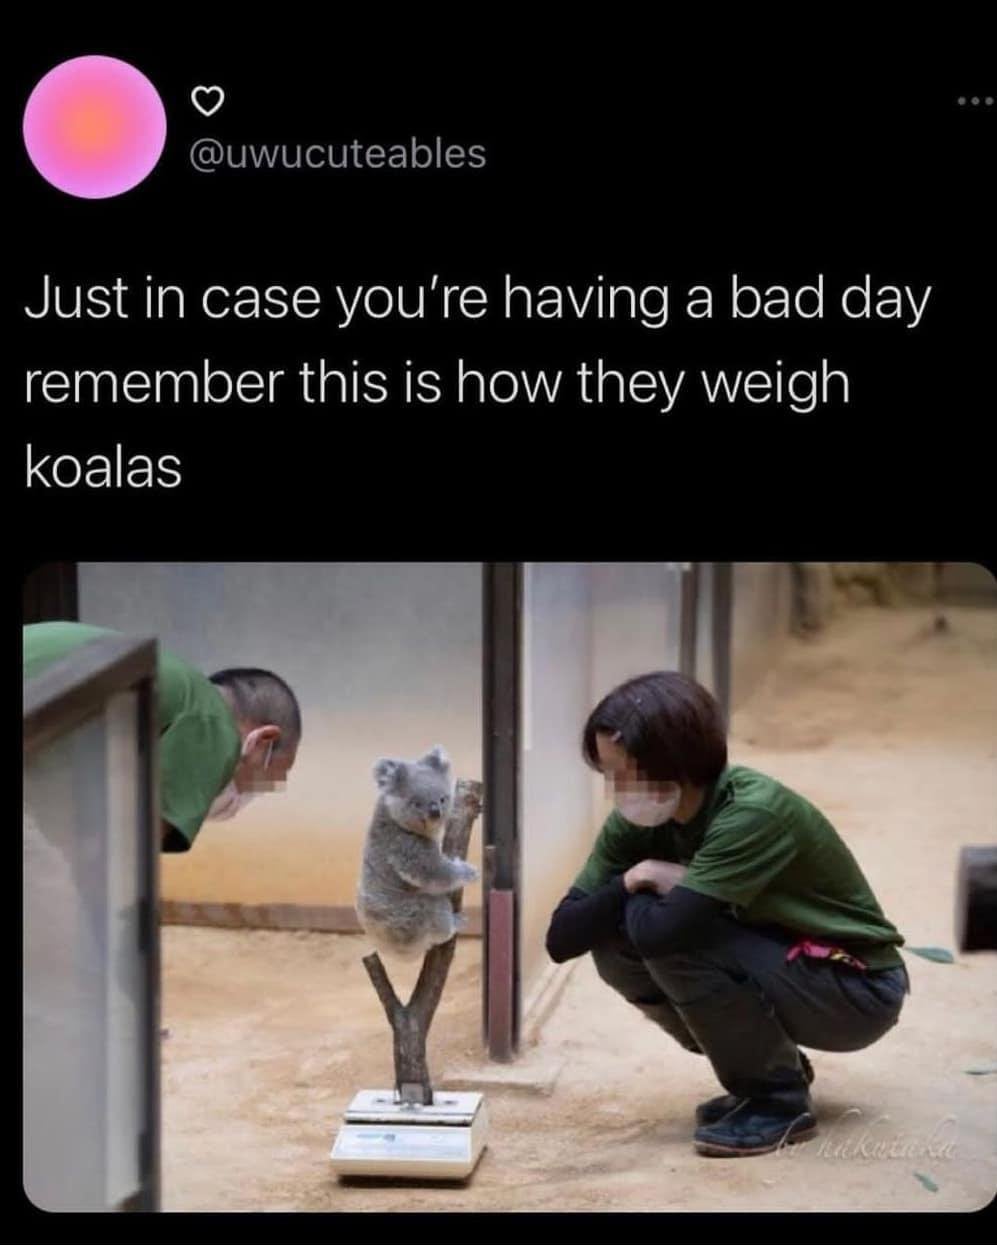 screenshot of a tweet from twitter user @uwucuteables that includes a photo of two people, whose faces are blurred out, weighing a koala with a caption that reads 